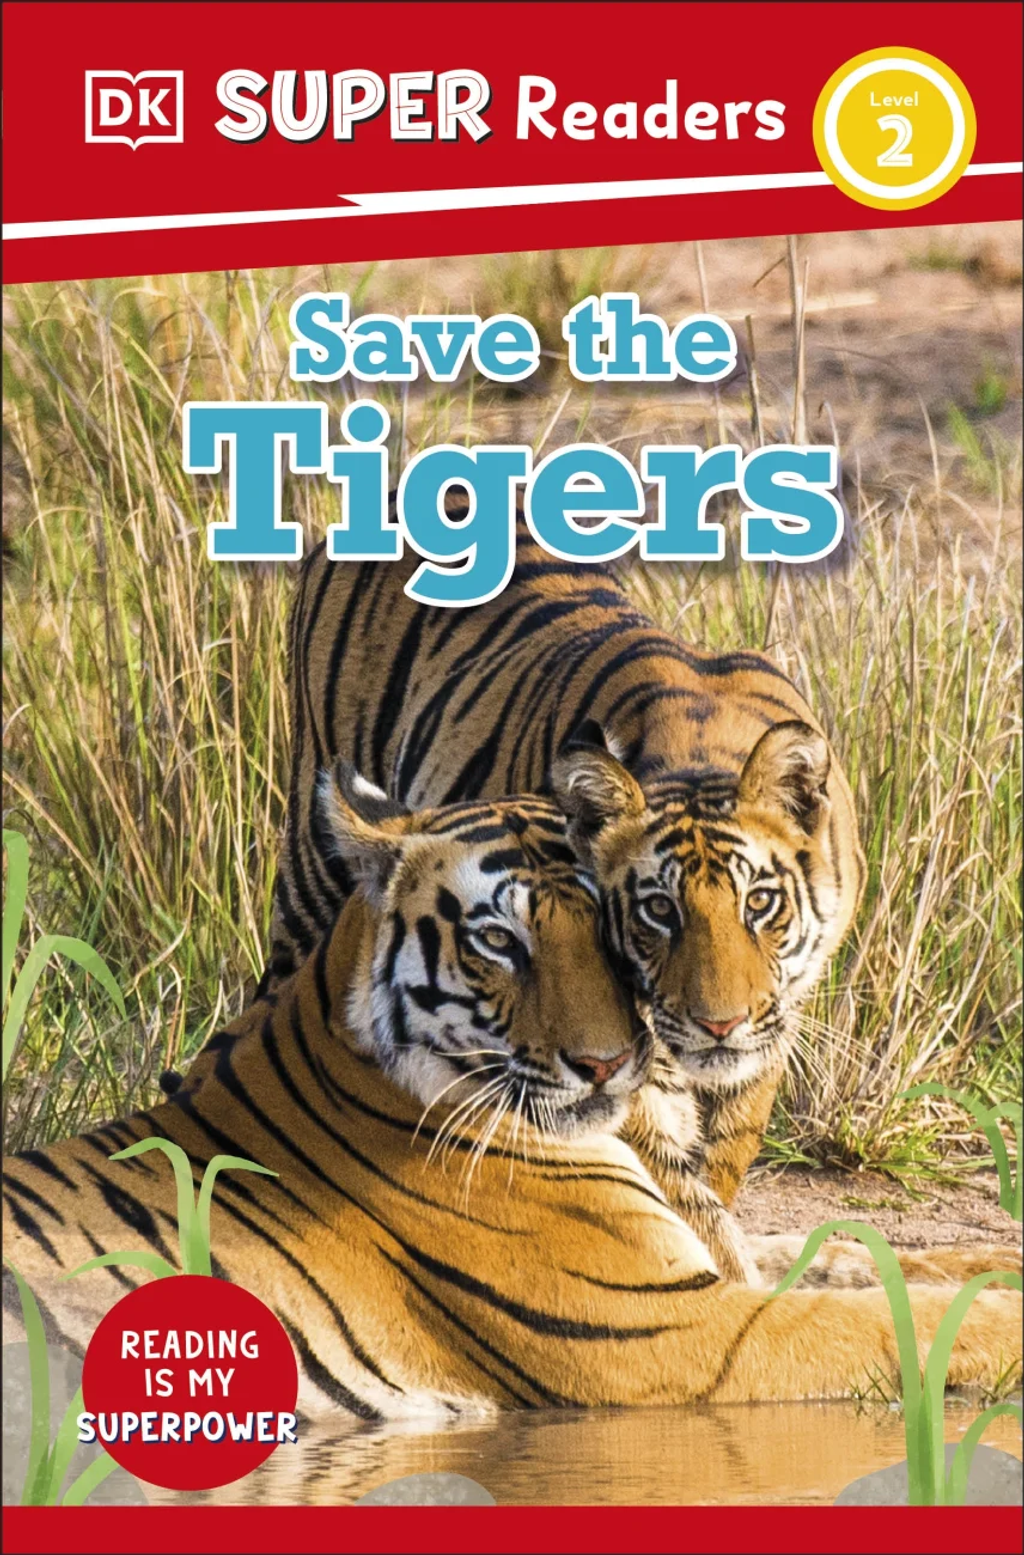 DK SUPER READERS - SAVE THE TIGERS 1